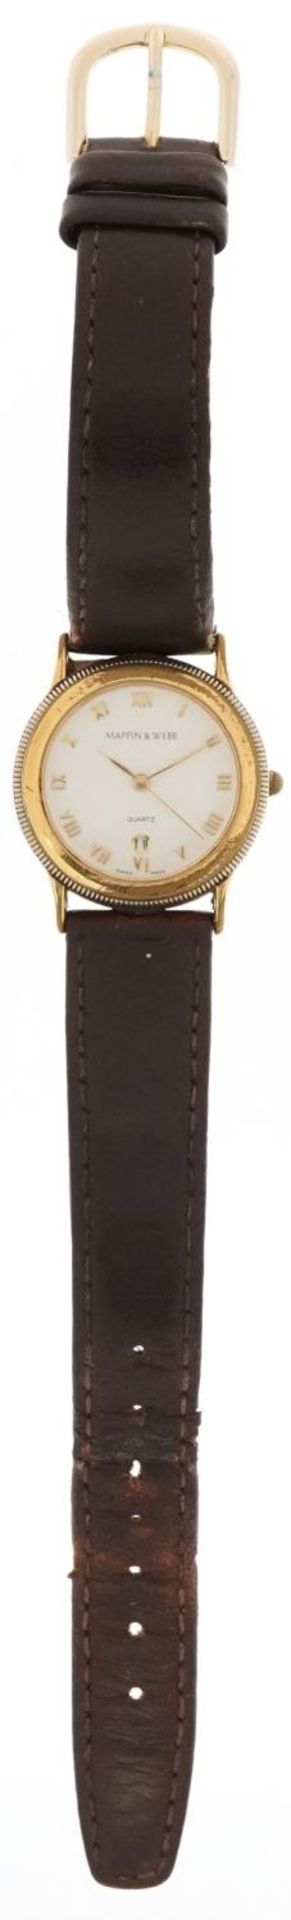 Mappin & Webb, ladies wristwatch with date aperture and box, 28mm in diameter - Image 2 of 5